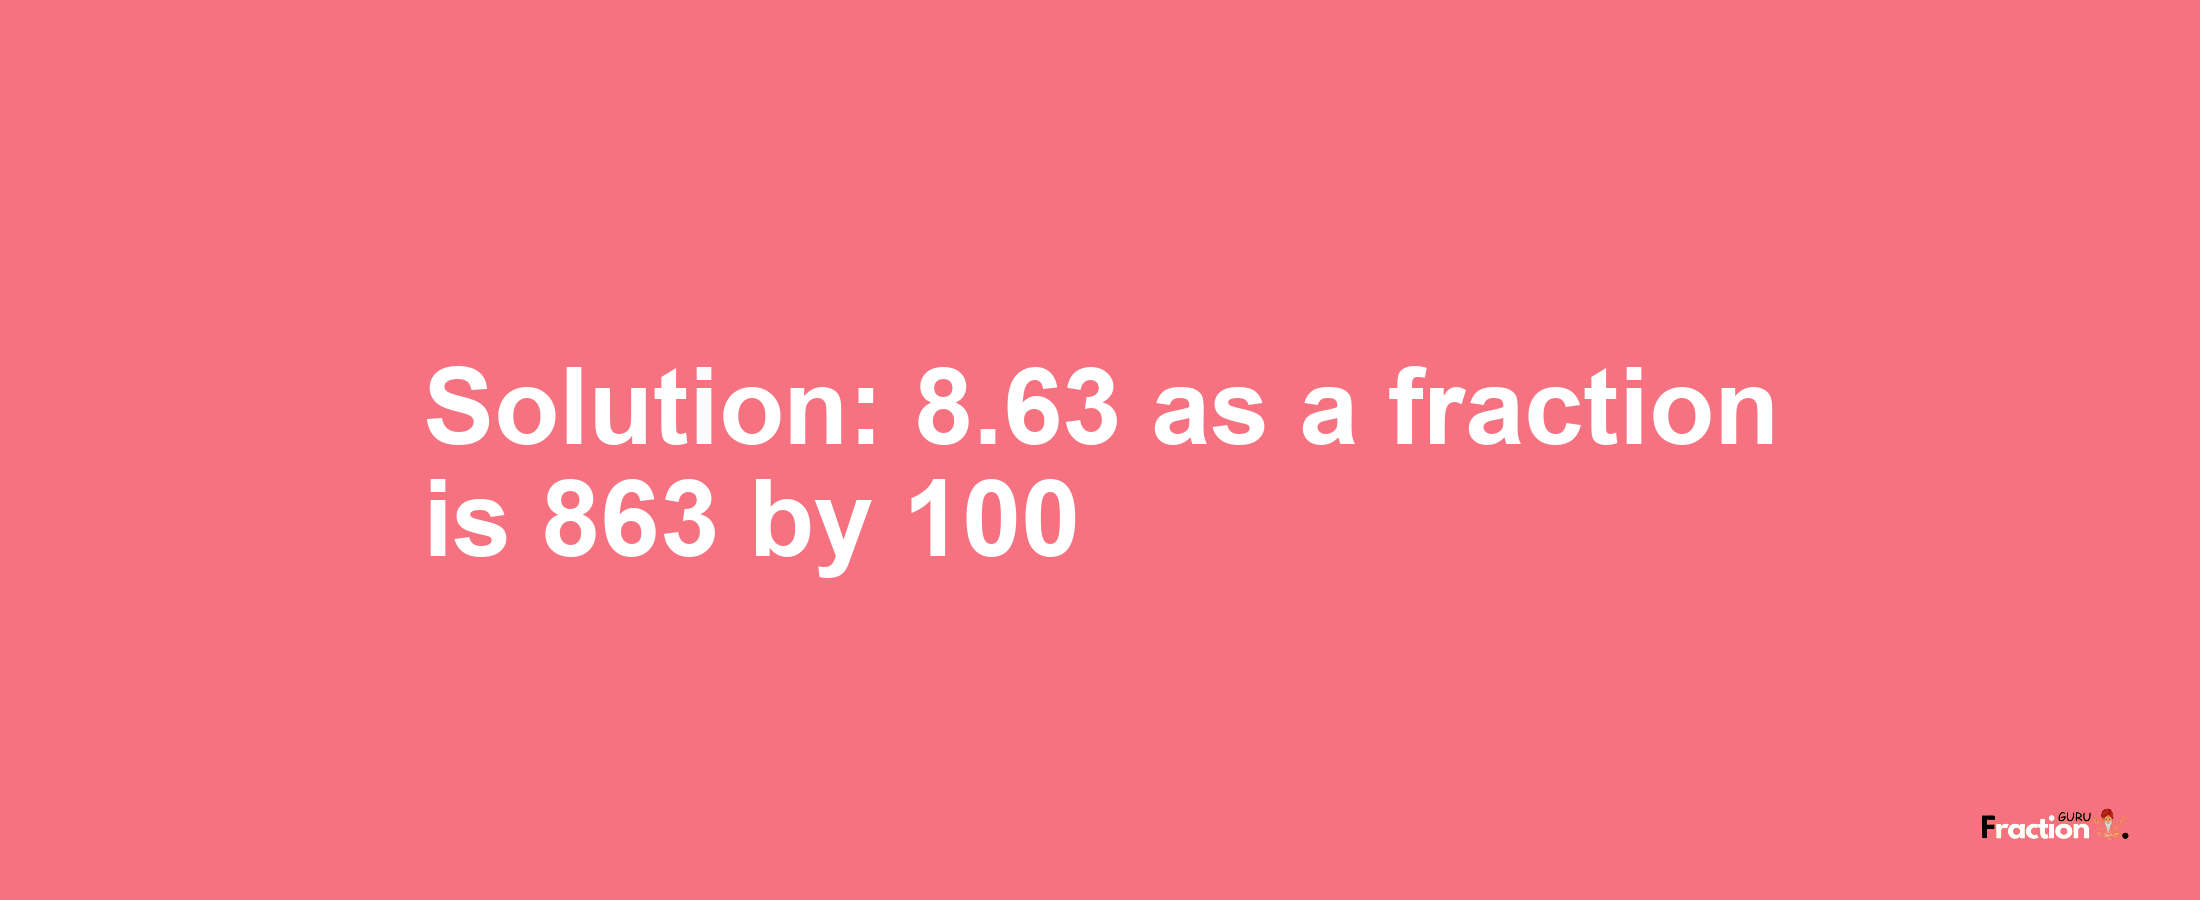 Solution:8.63 as a fraction is 863/100